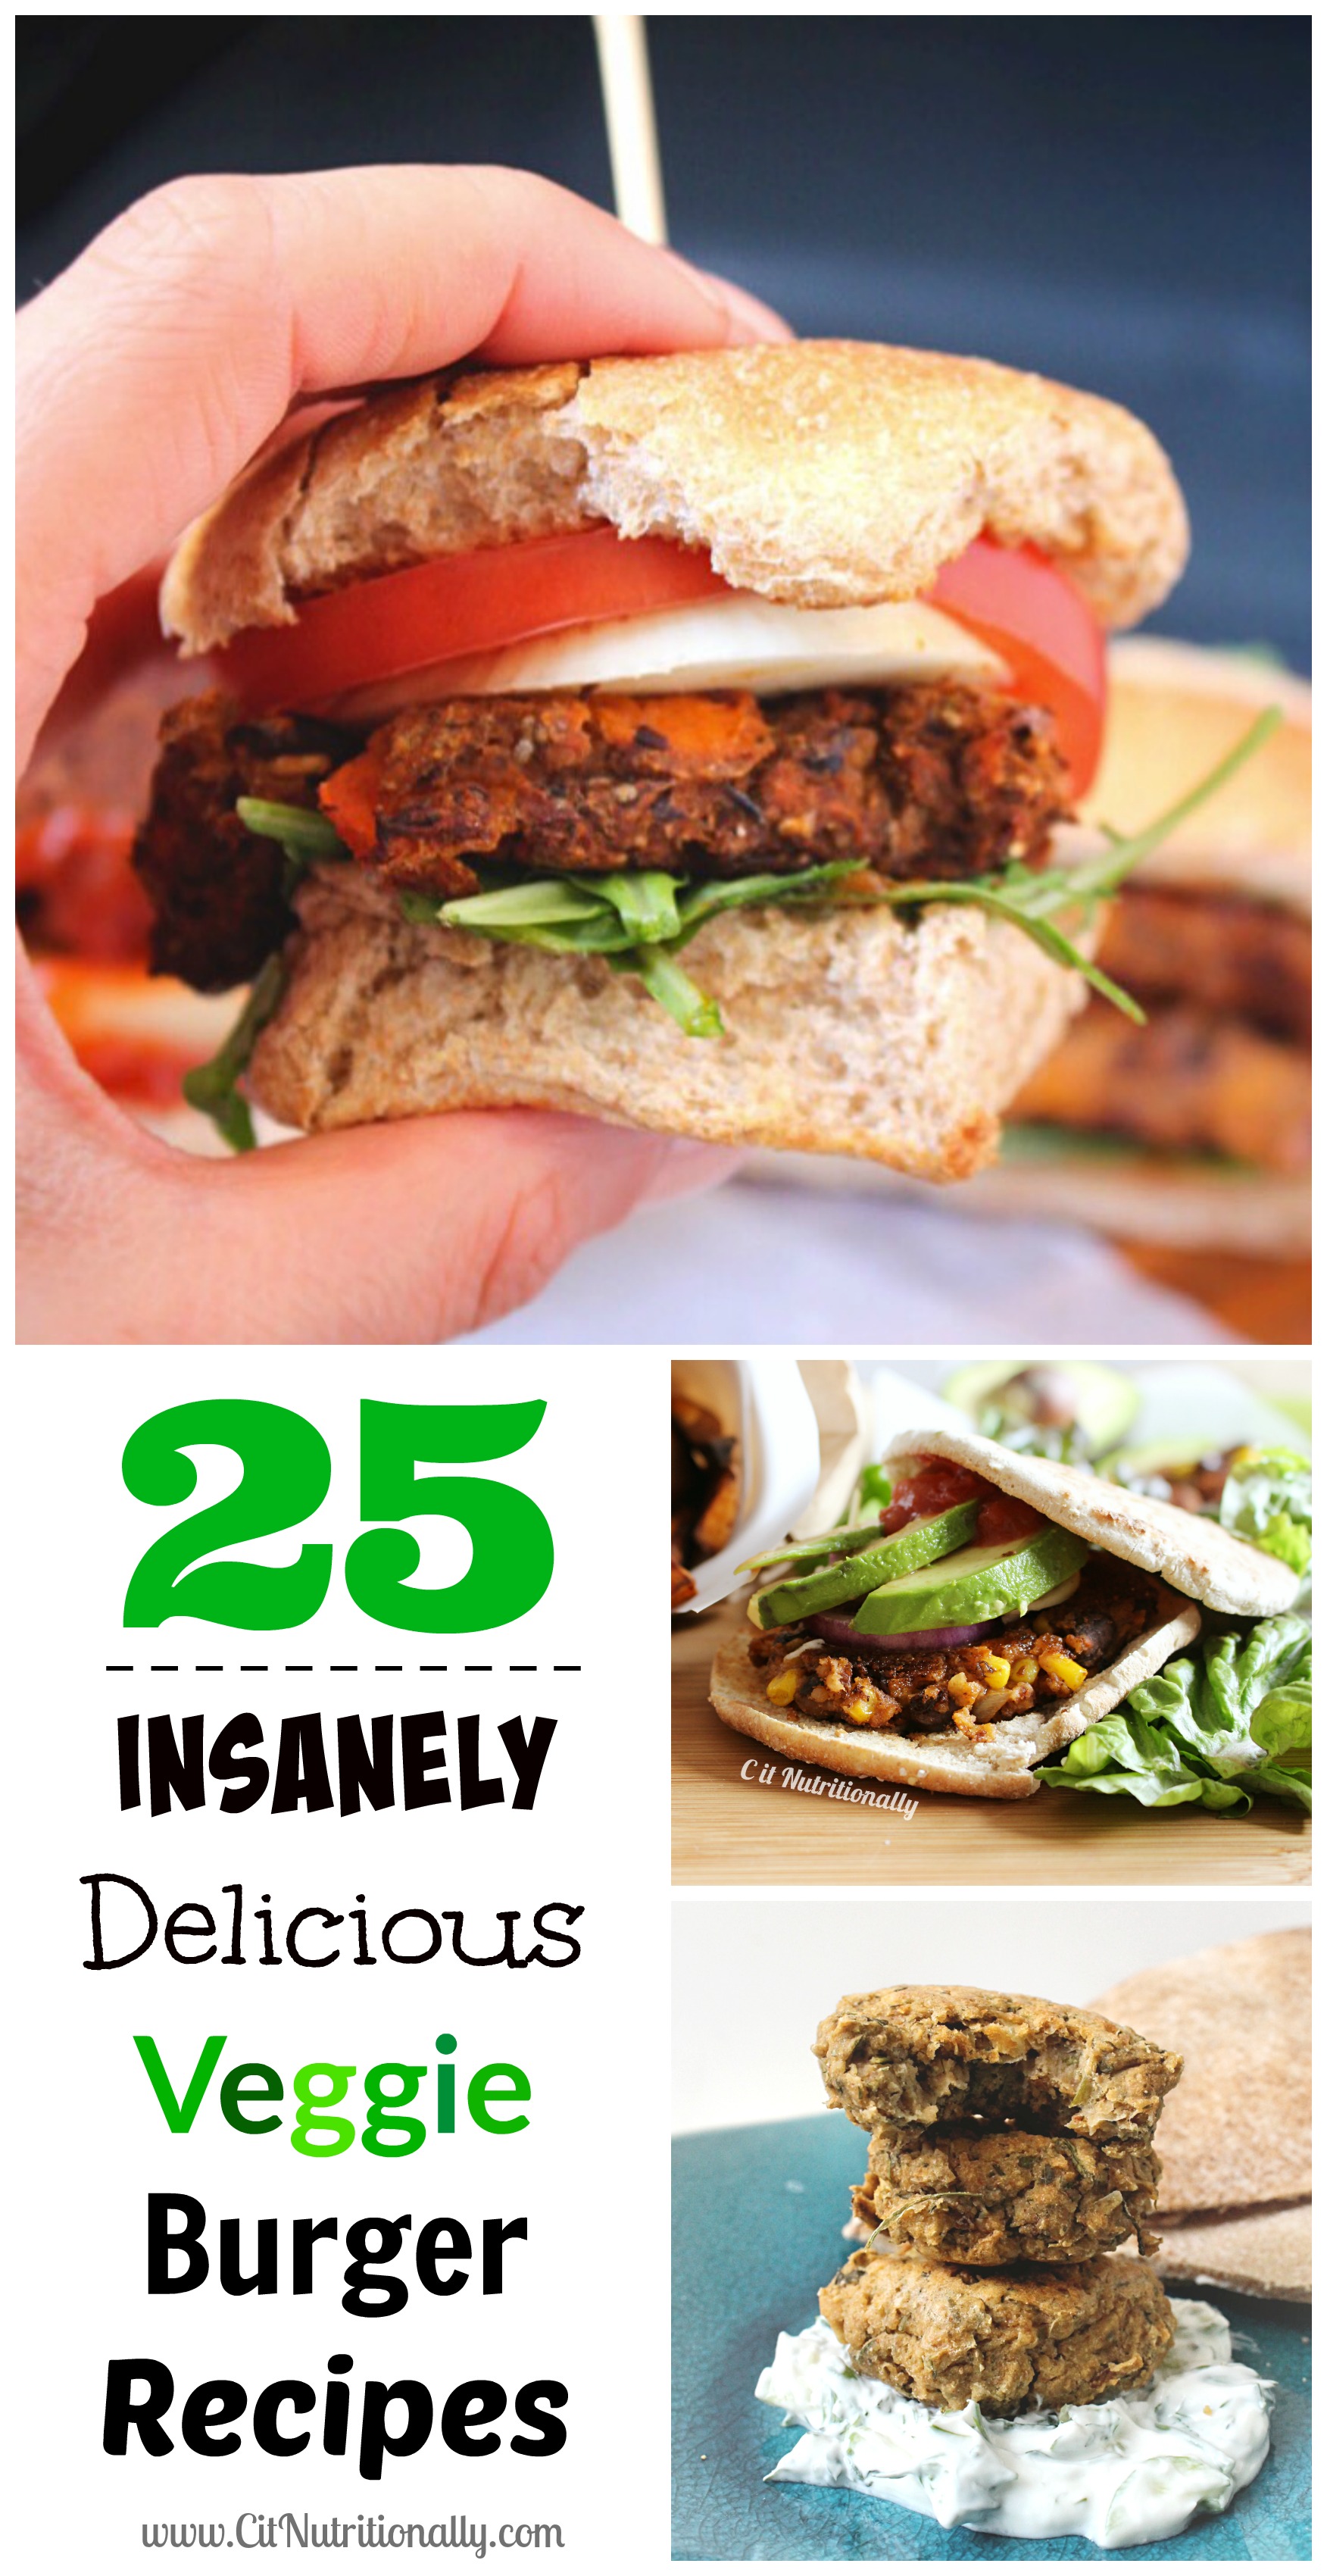 25 Insanely Delicious Veggie Burger Recipes | C it Nutritionally